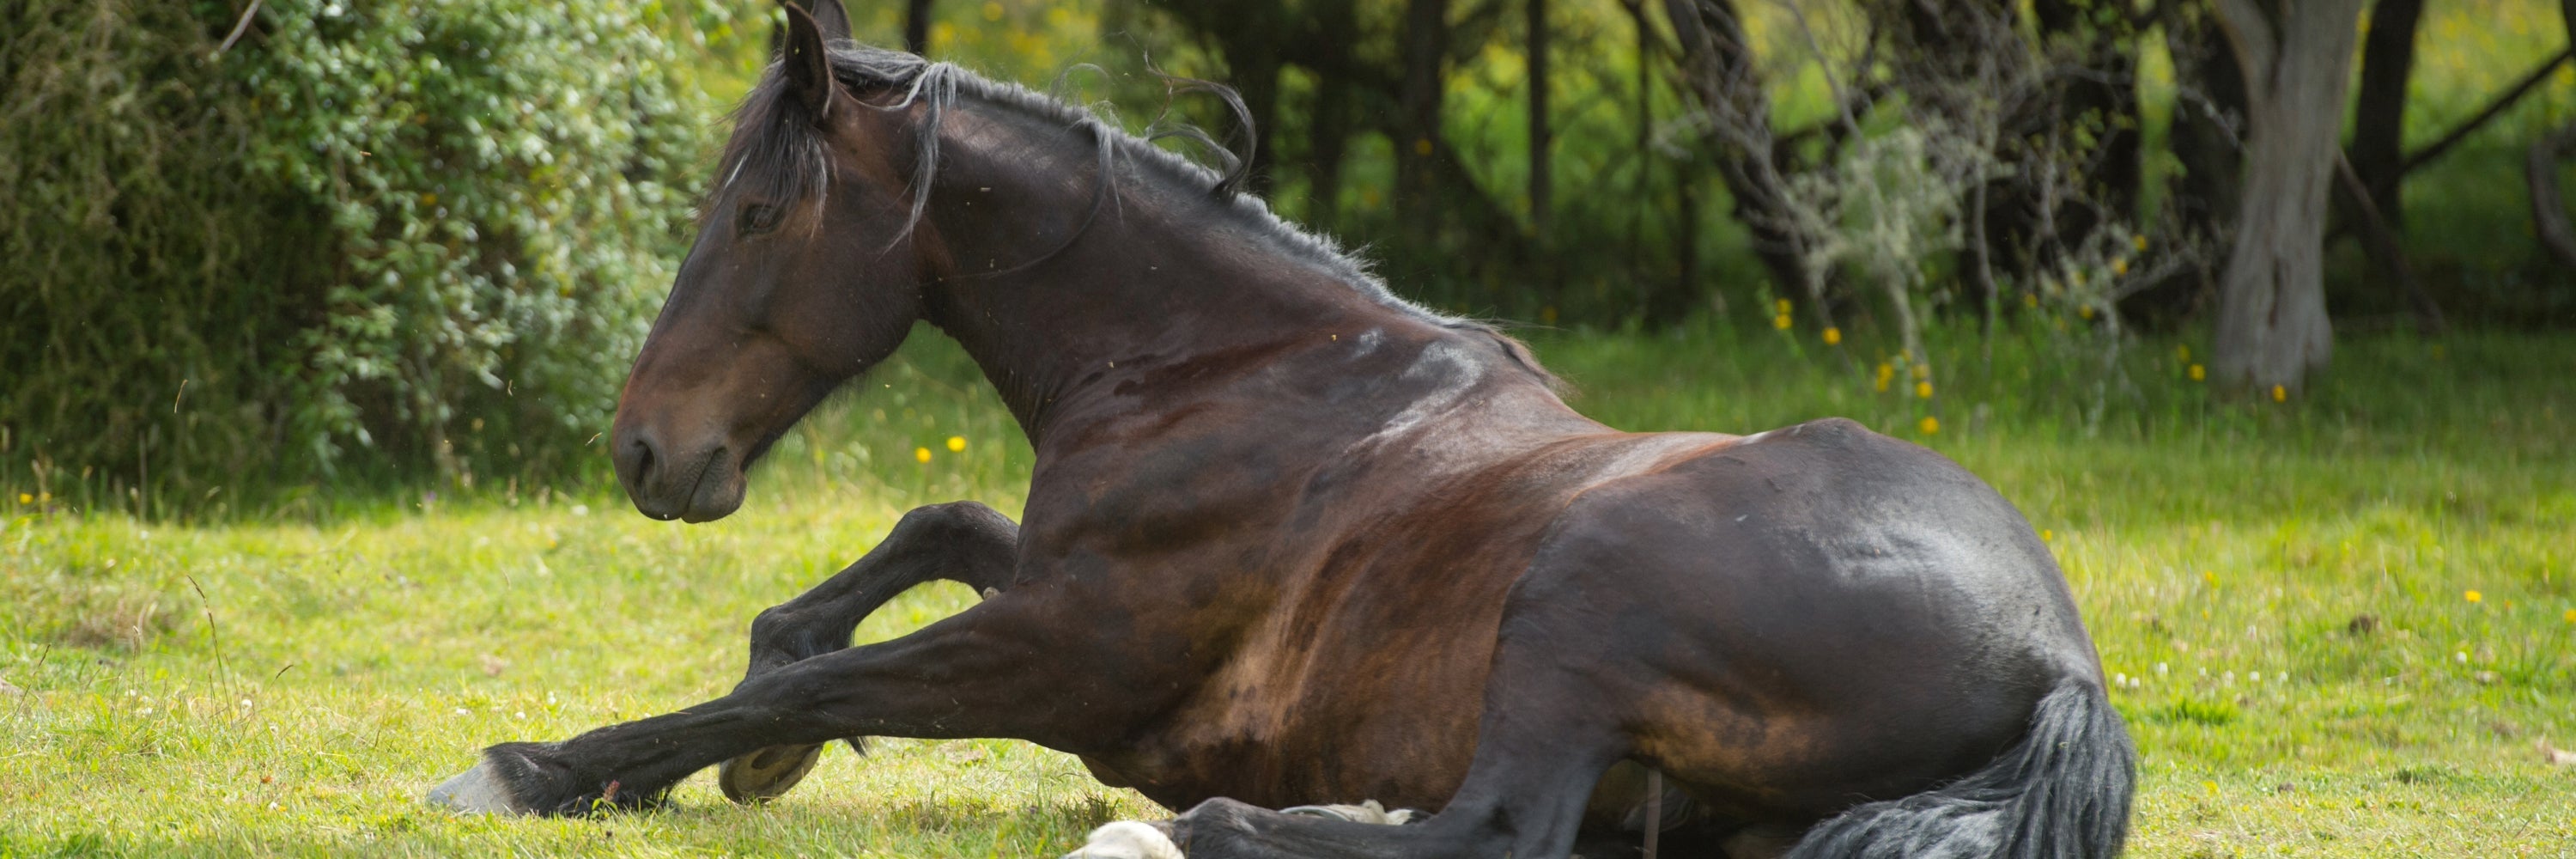 Horse Laying in Green Grass. Horse Gut Supplements 	Gut Health for Horses, Equine Gut Supplements